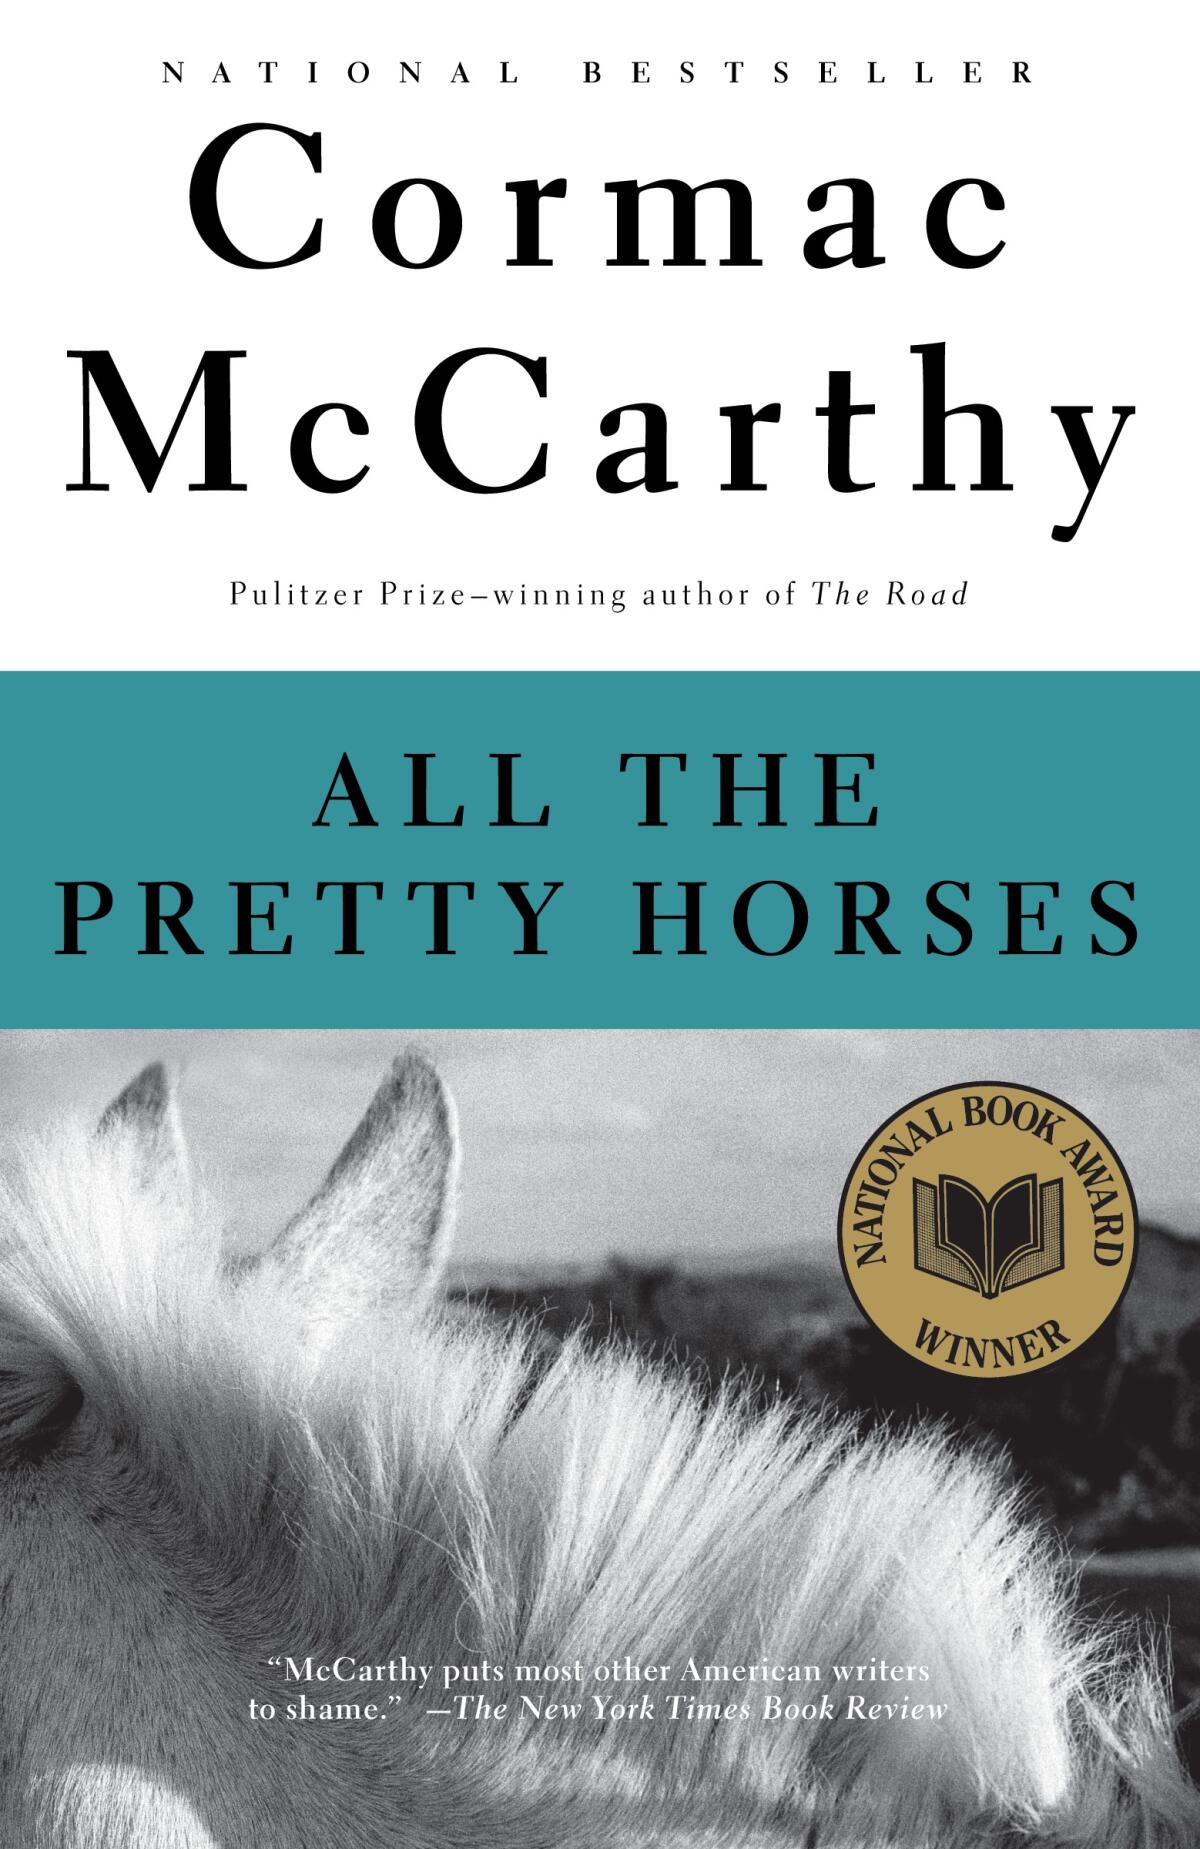 Book cover for "All the Pretty Horses" by Cormac McCarthy, featuring a black-and-white image of a horse's mane.